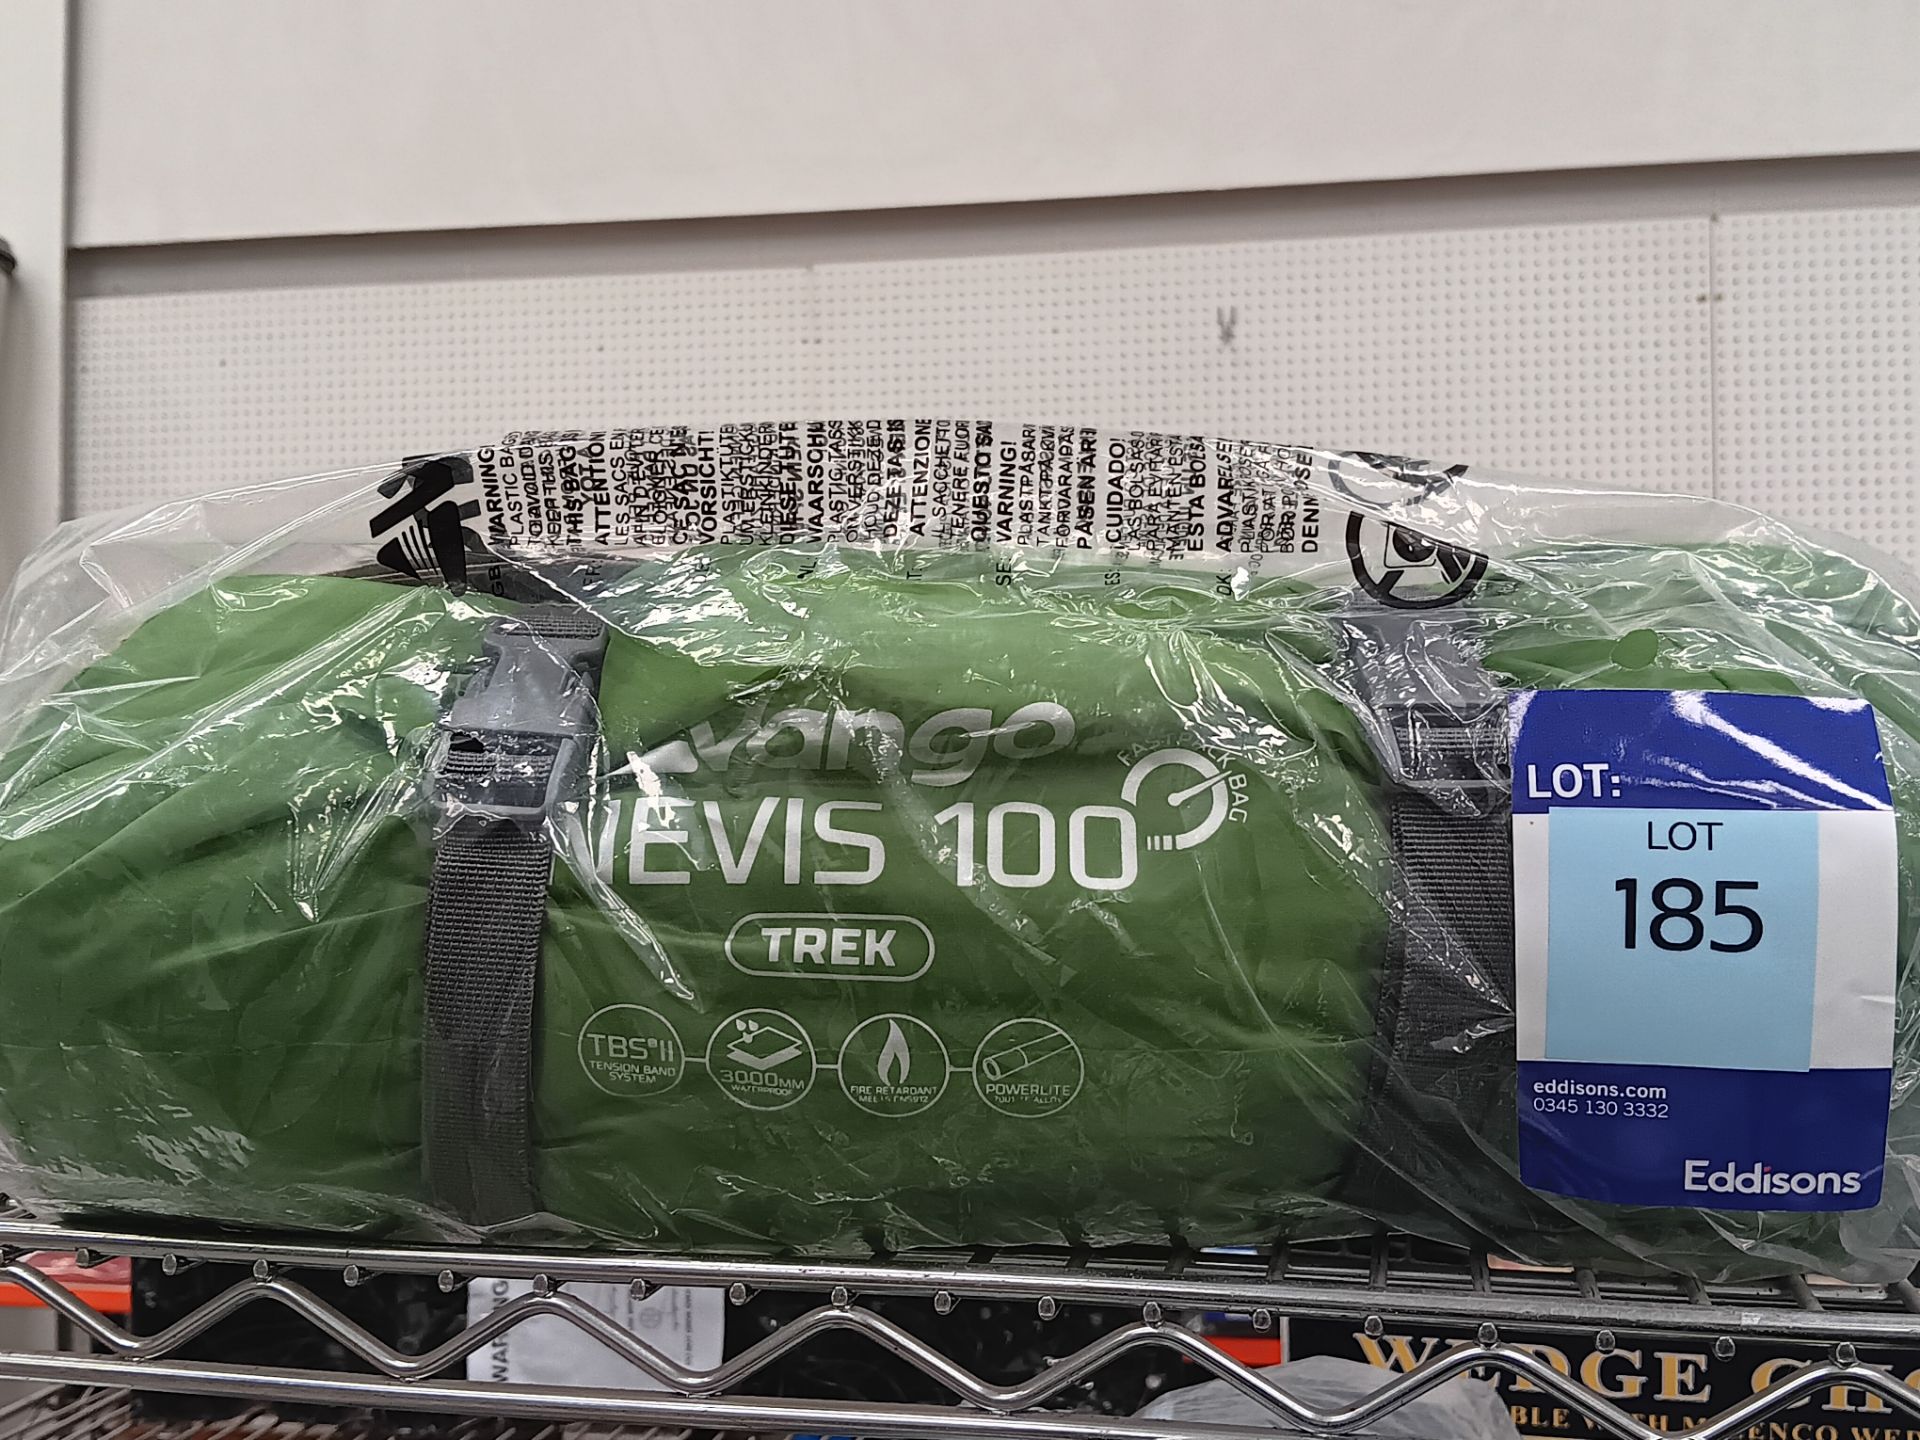 Vango Nevis 100 Trek Tent (Please note, Viewing Strongly Recommended - Eddisons have not inspected